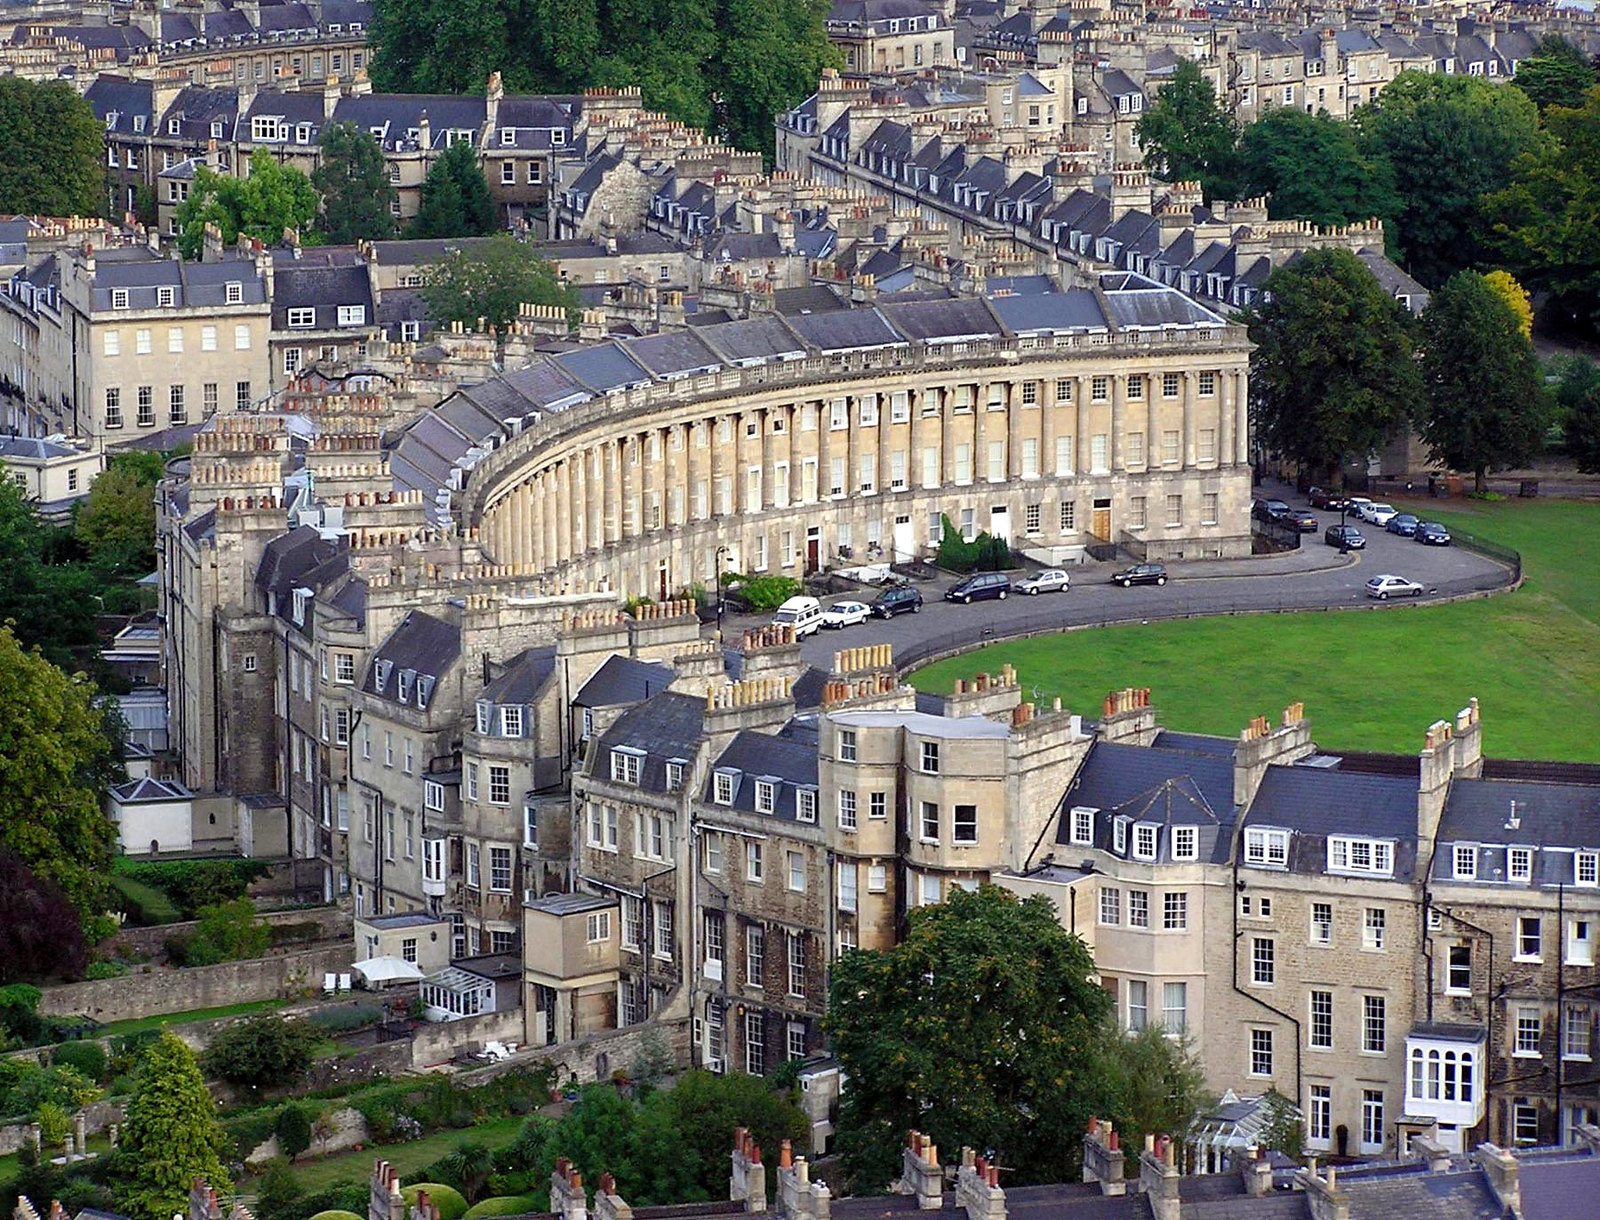 The Royal Crescent in the City of Bath